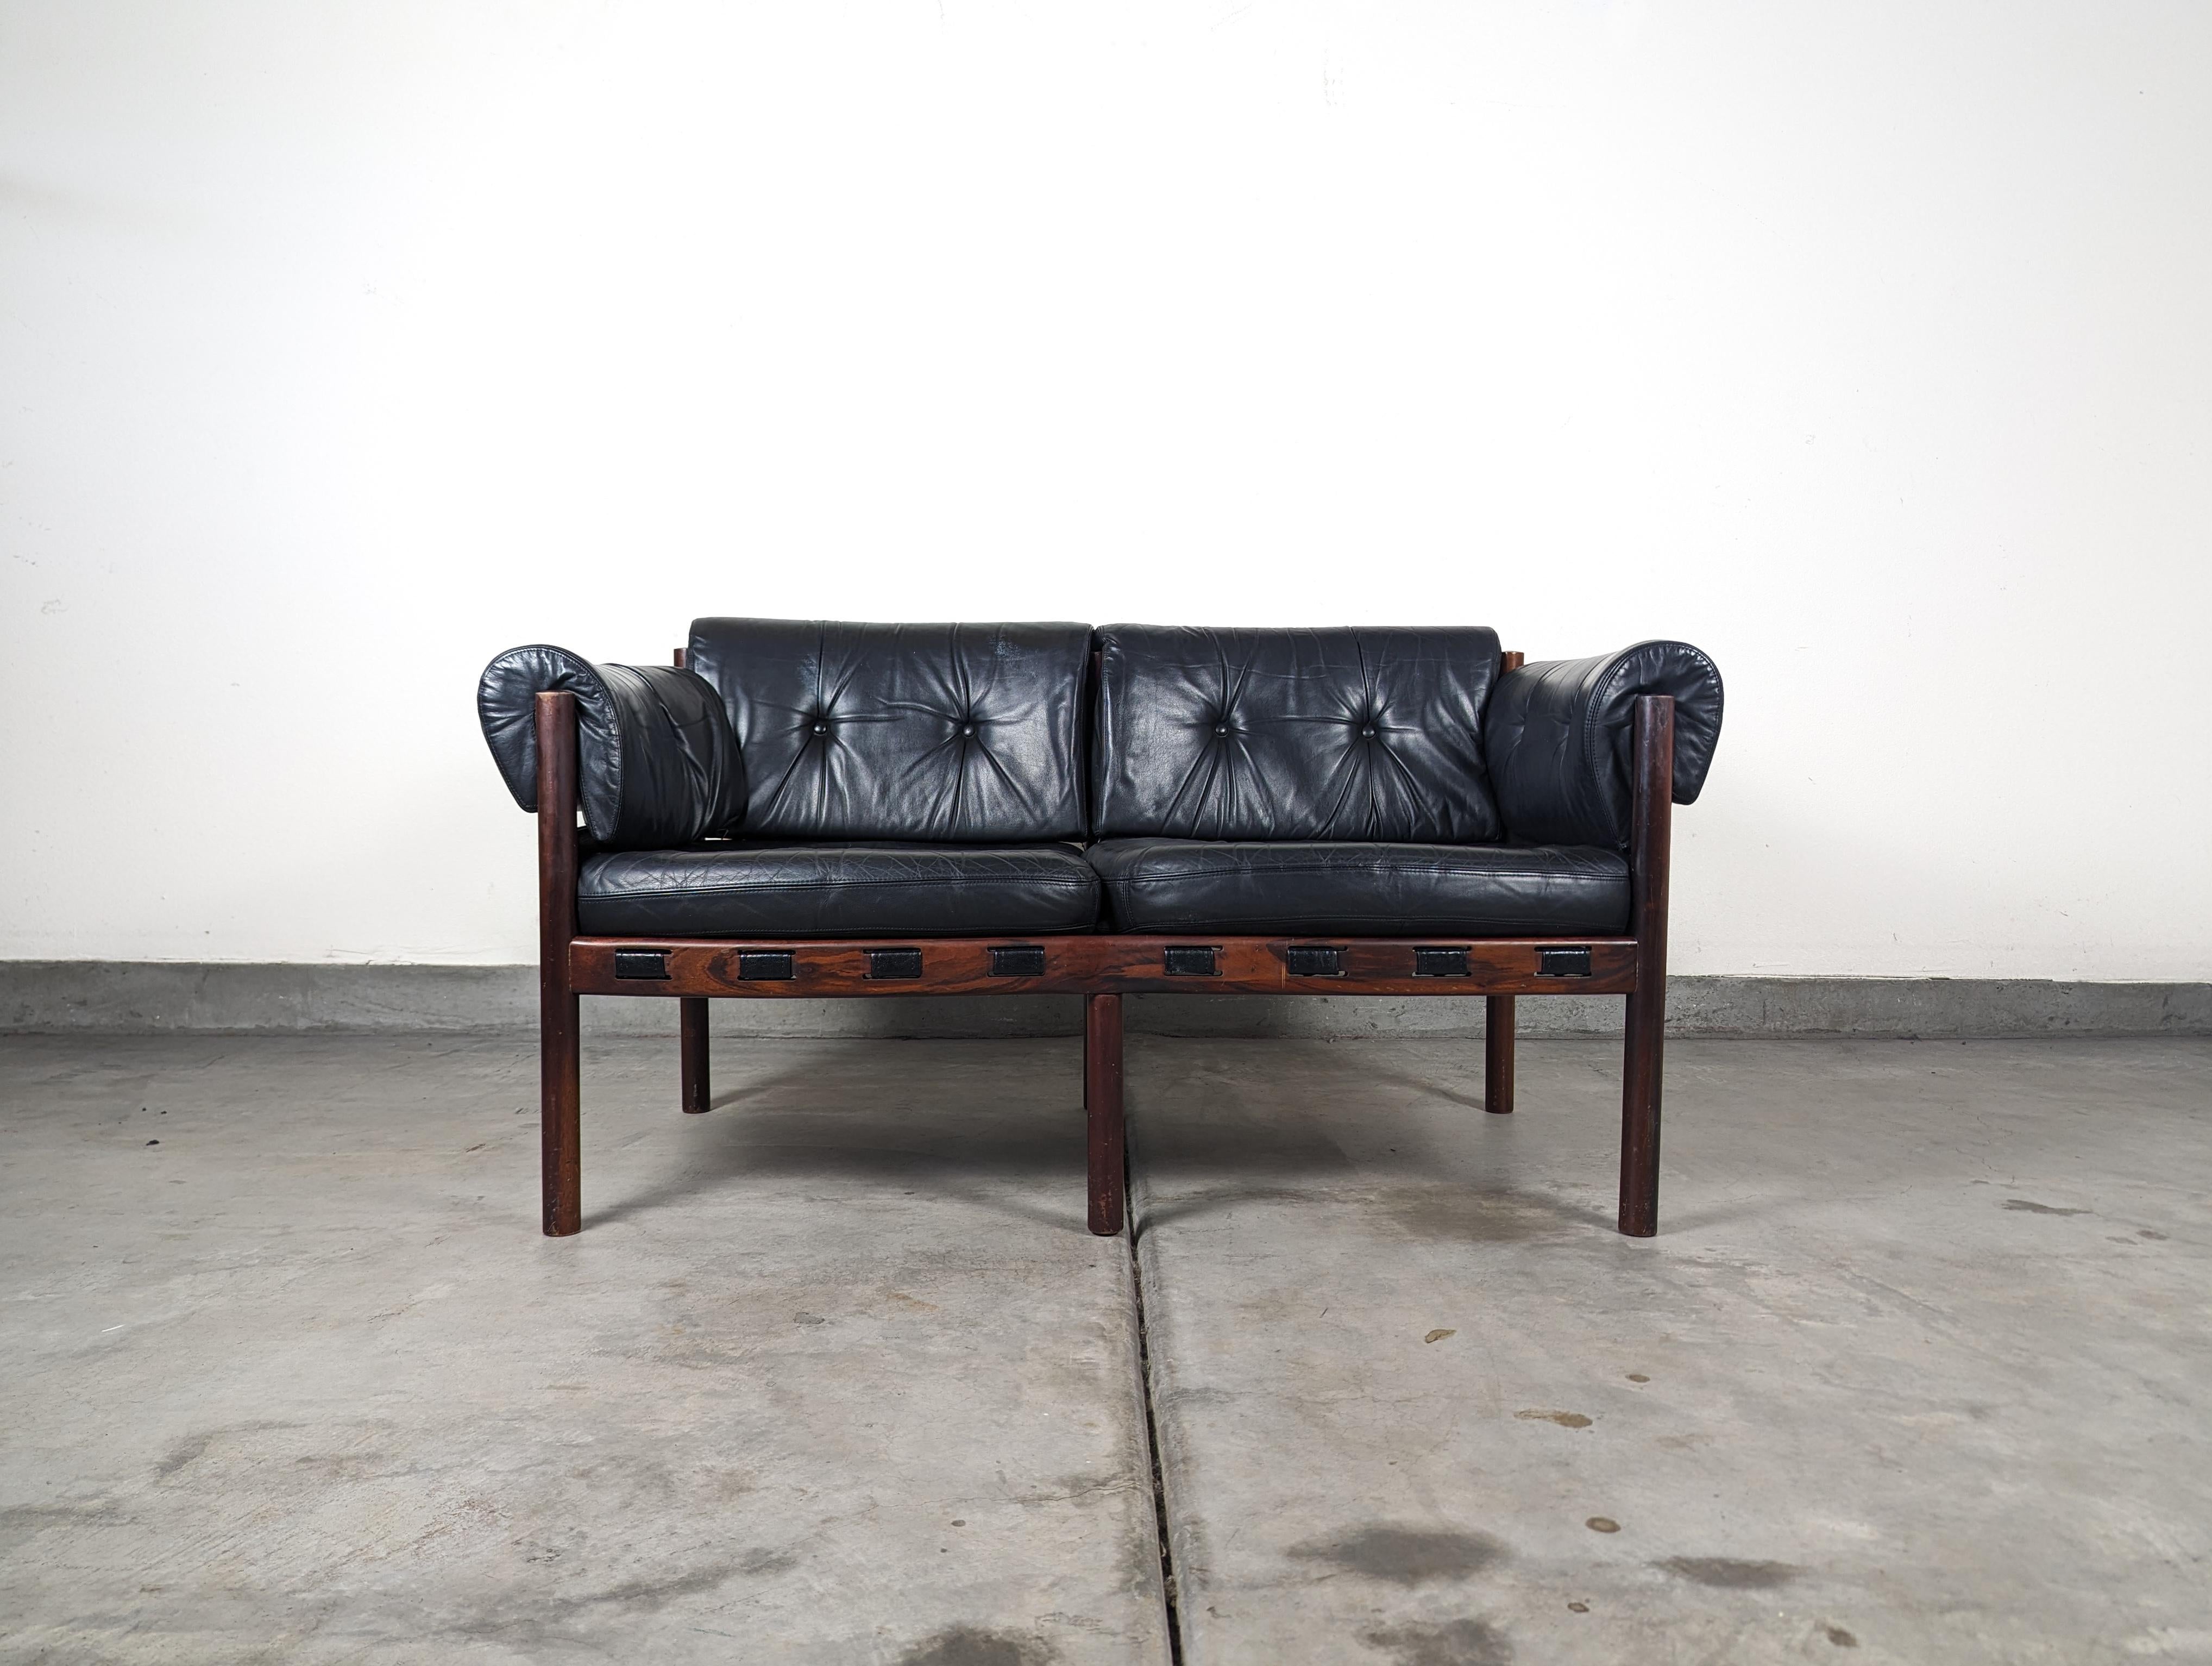 Presenting for sale, an iconic, rare, and highly sought-after mid-century modern loveseat designed by the legendary Swedish designer, Arne Norell. This exquisite piece originates from the 1960s

This particular version is fashioned from luxurious